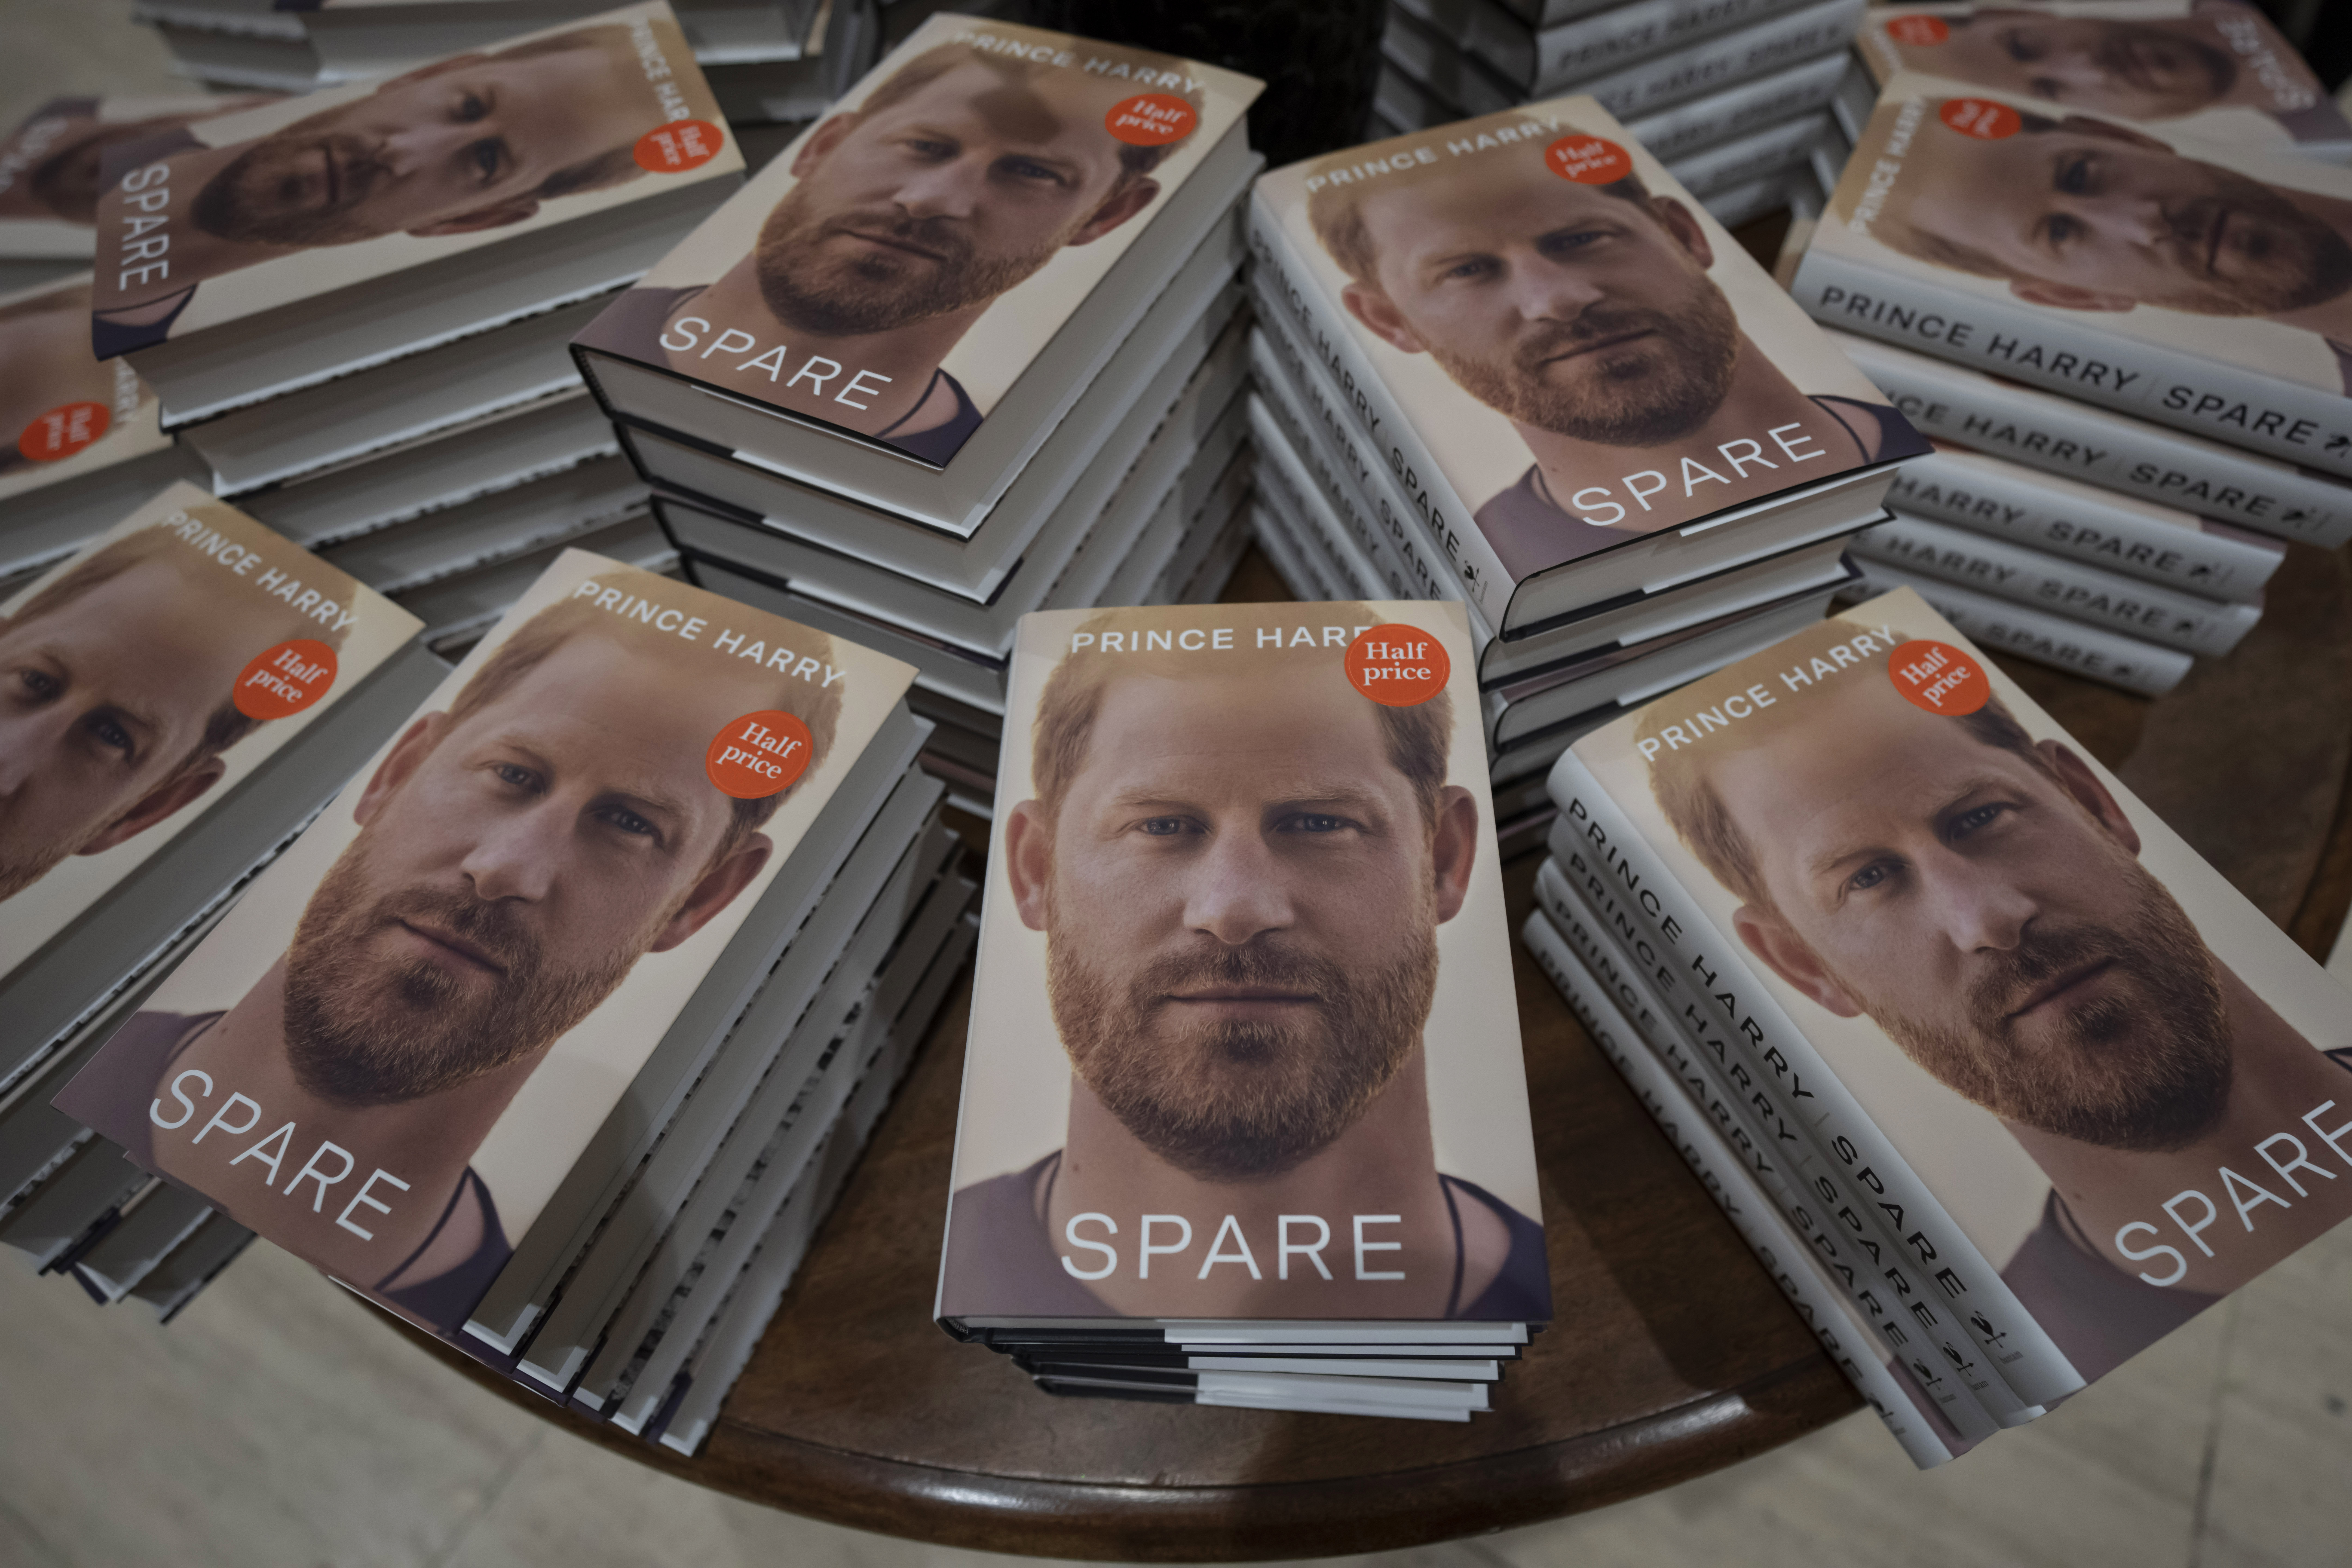 Copies of Prince Henry's book "Spare" in a bookstore in London (AP Photo)